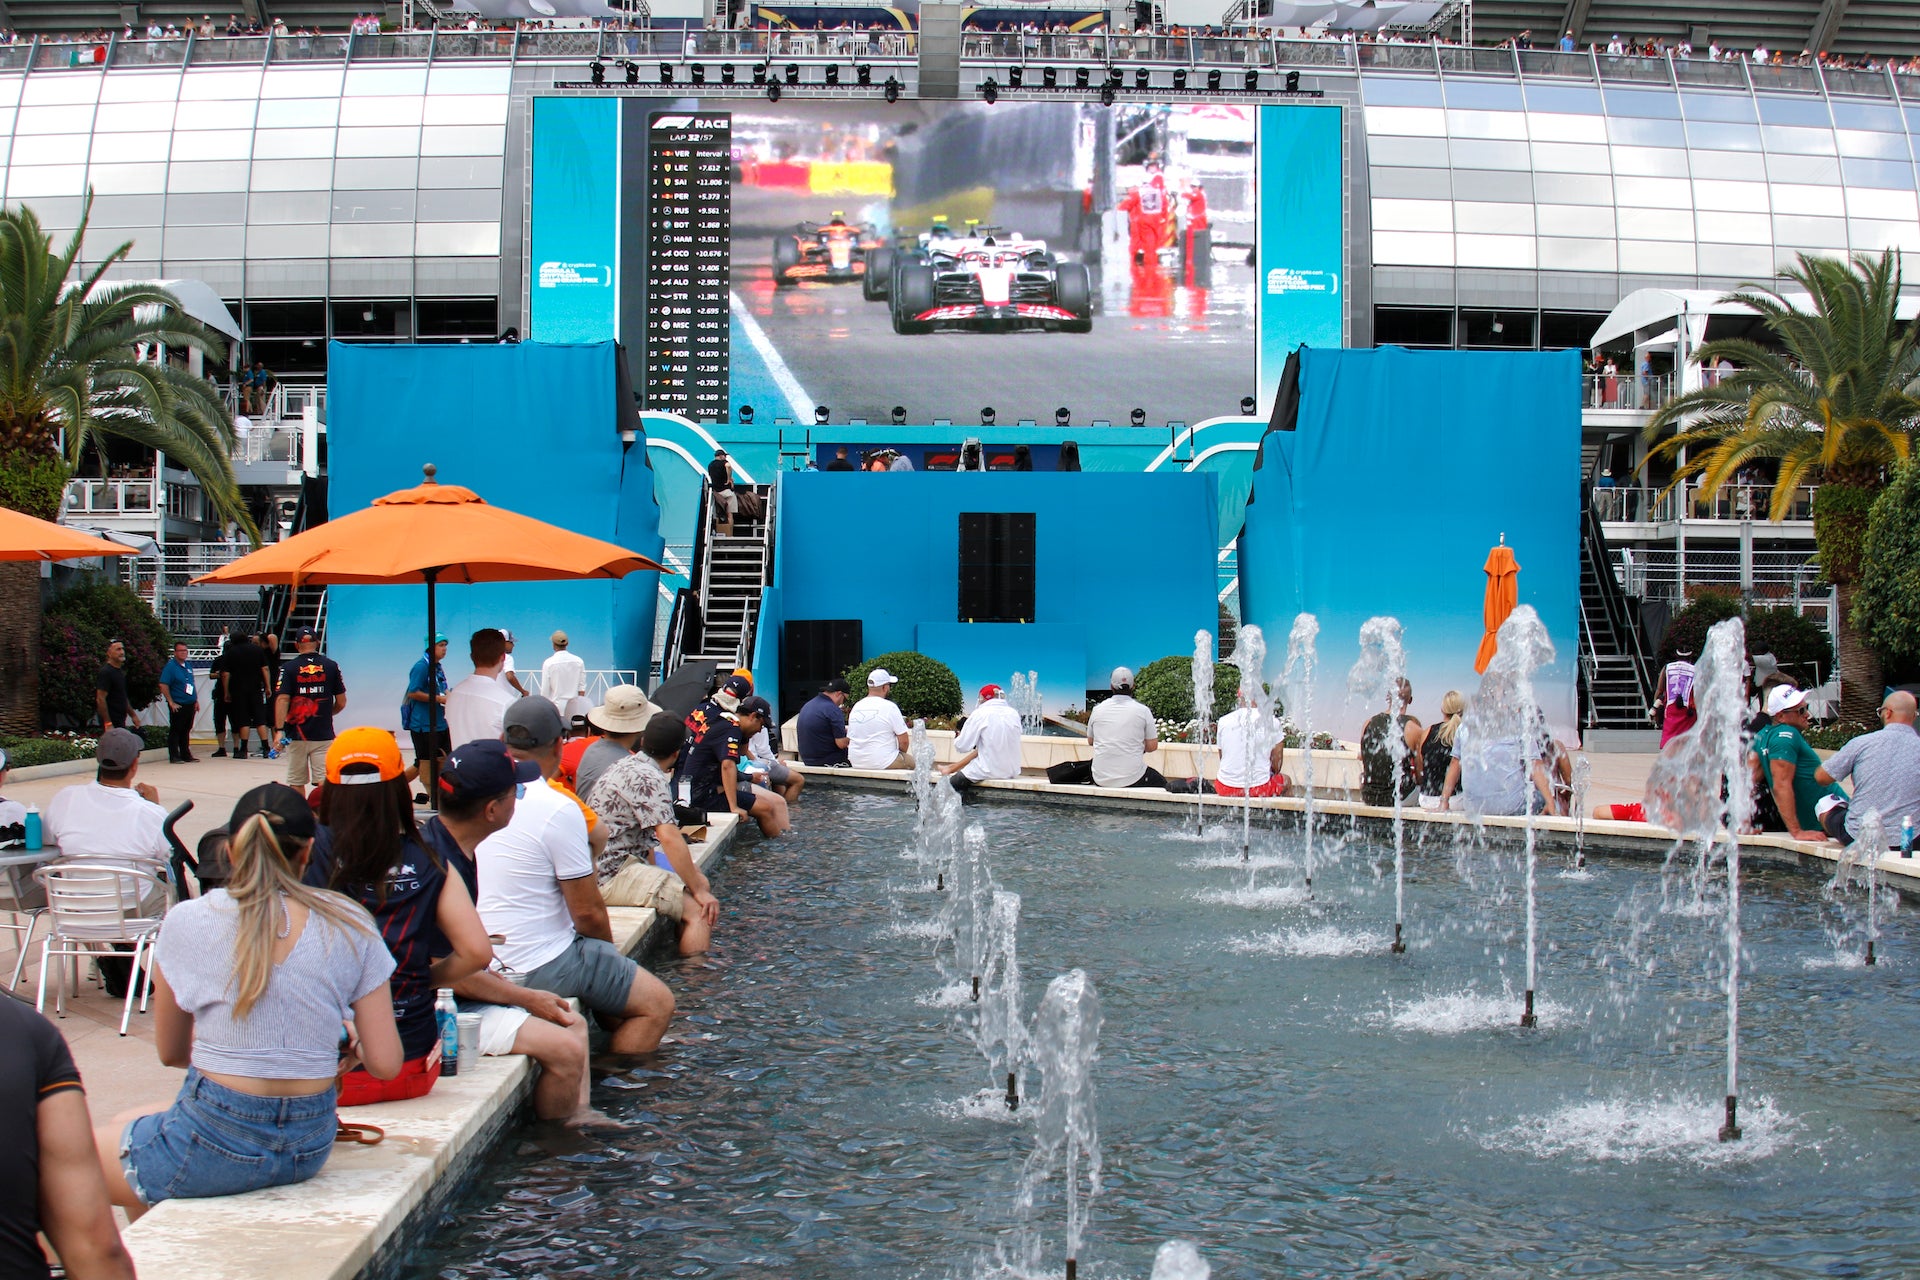 The Miami F1 Grand Prix Was an Overwhelming Success, Like It or Not